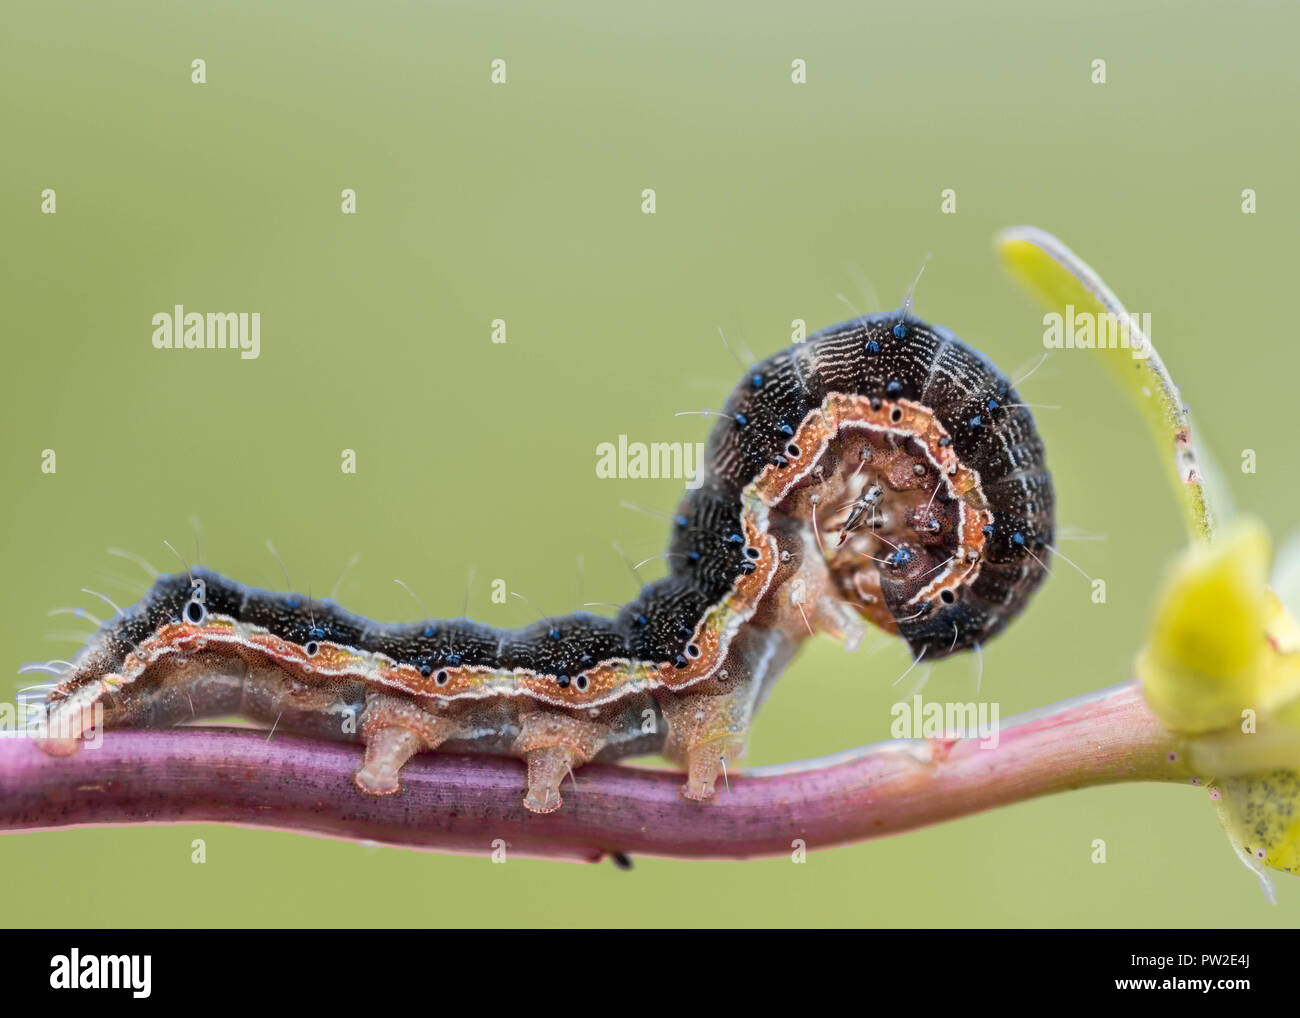 A small black with stripes caterpillar on a stem bends its head. Macro shot. Stock Photo